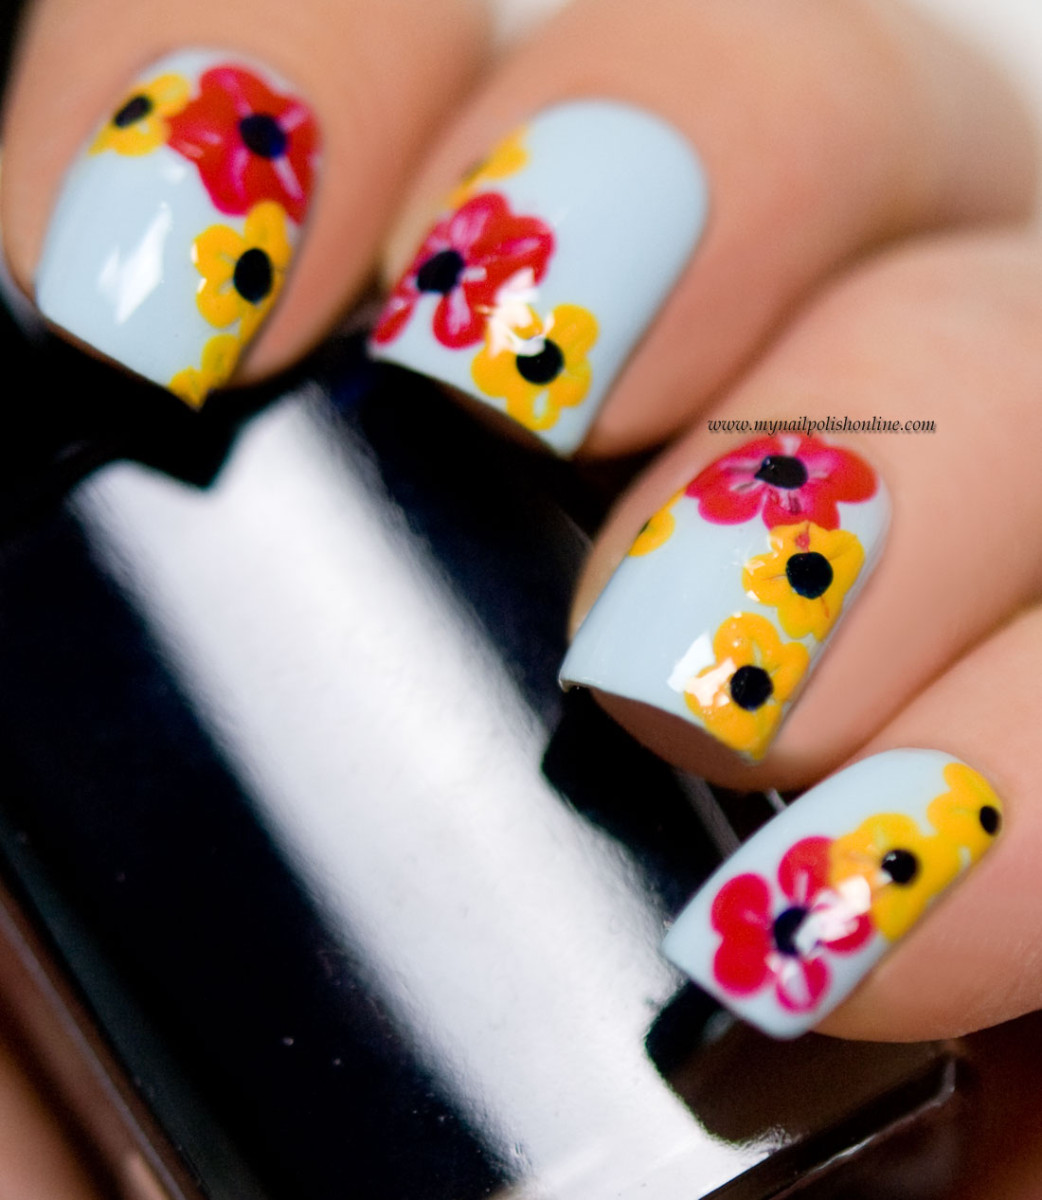 Nail art with flowers